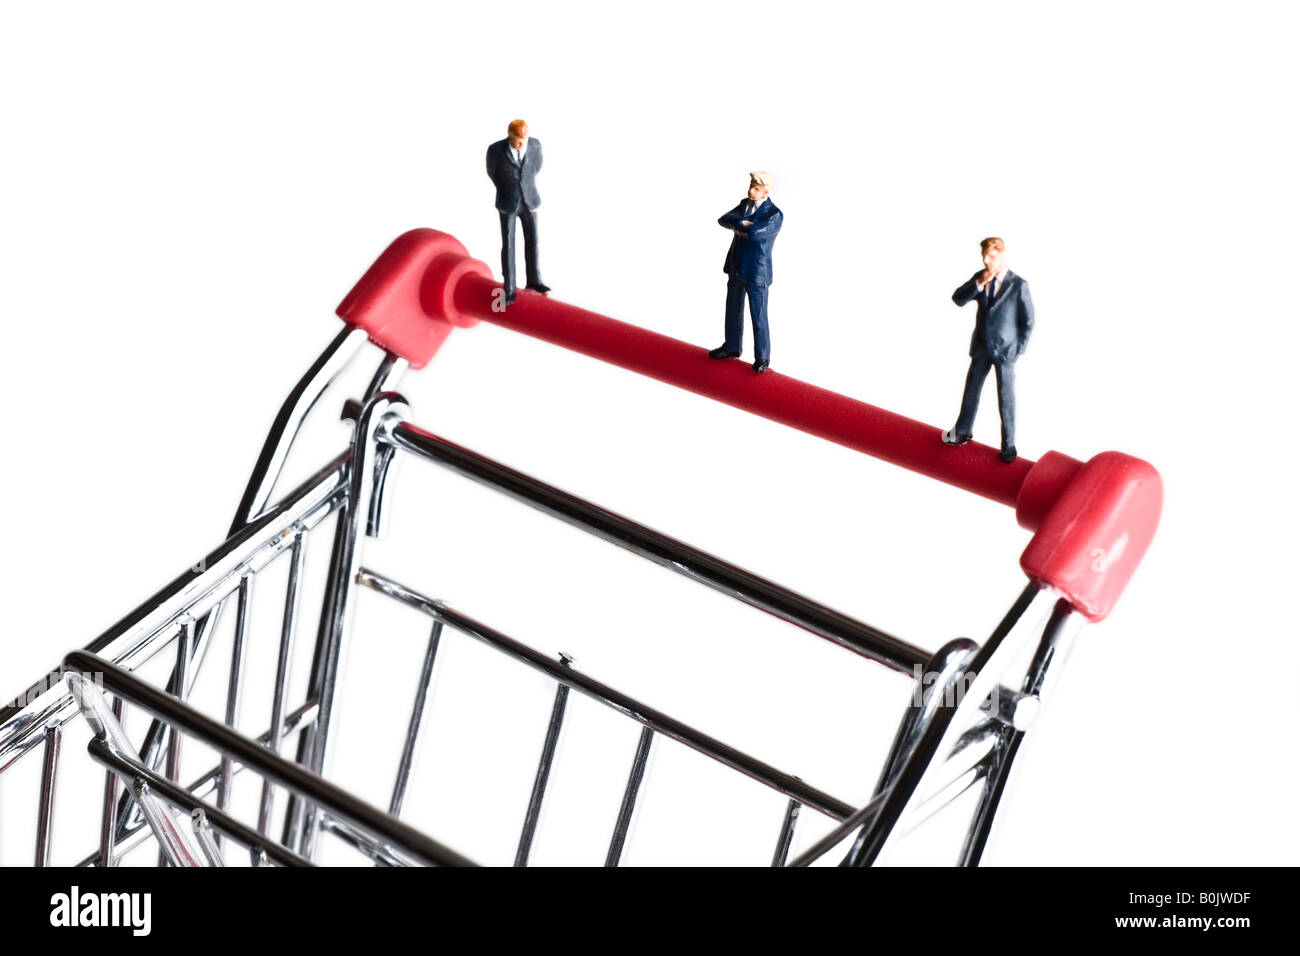 Businessman figurines standing on a shopping cart Stock Photo